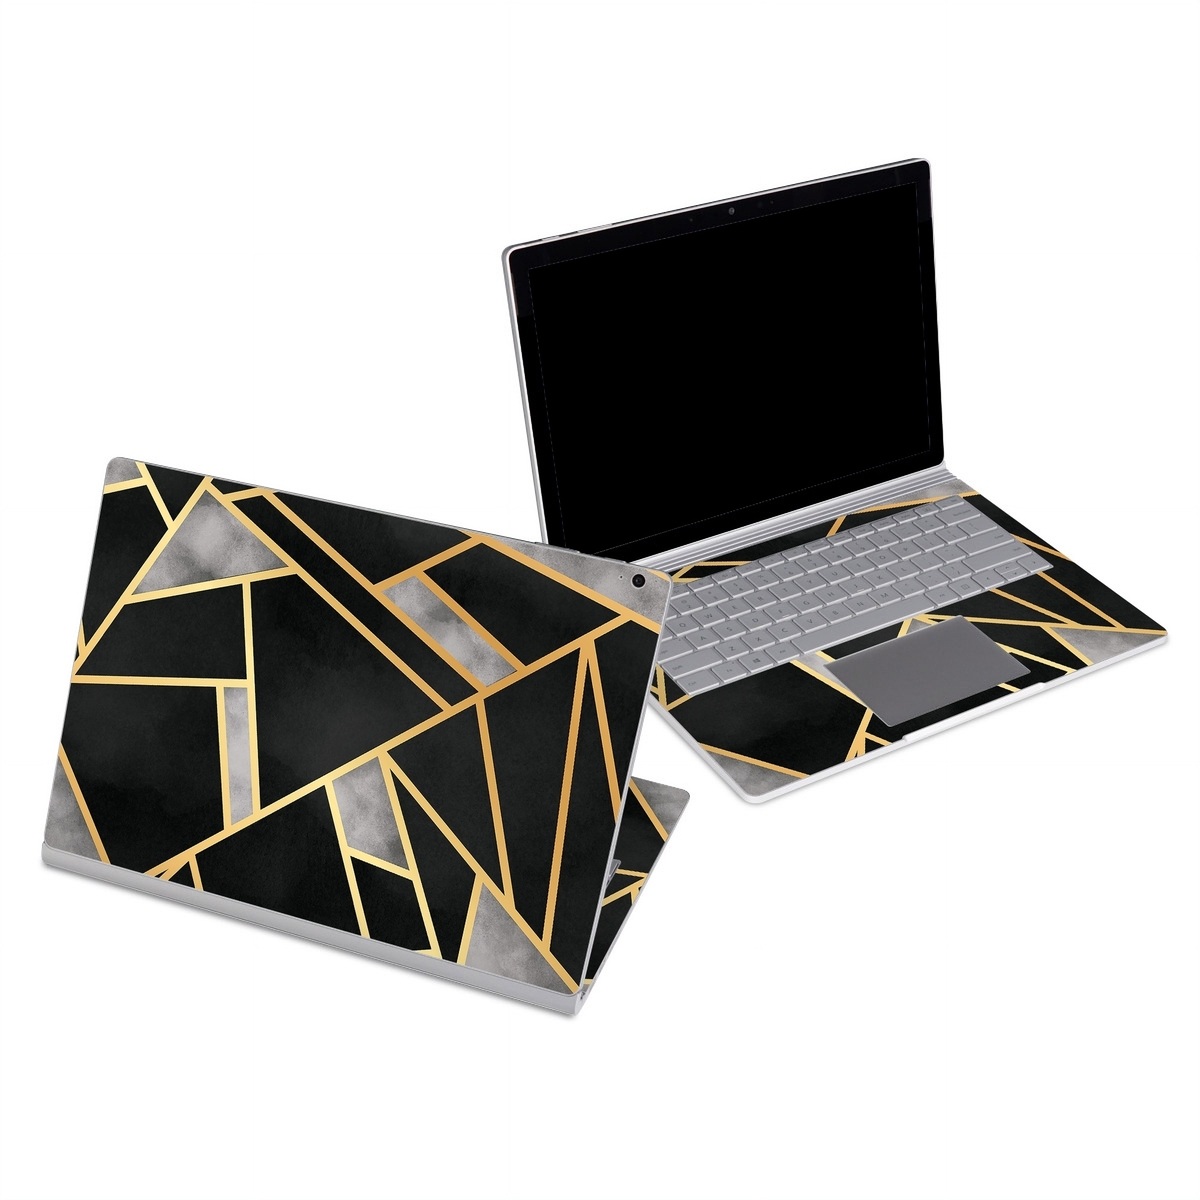 Microsoft Surface Book Series Skin design of Pattern, Triangle, Yellow, Line, Tile, Floor, Design, Symmetry, Architecture, Flooring, with black, gray, yellow colors